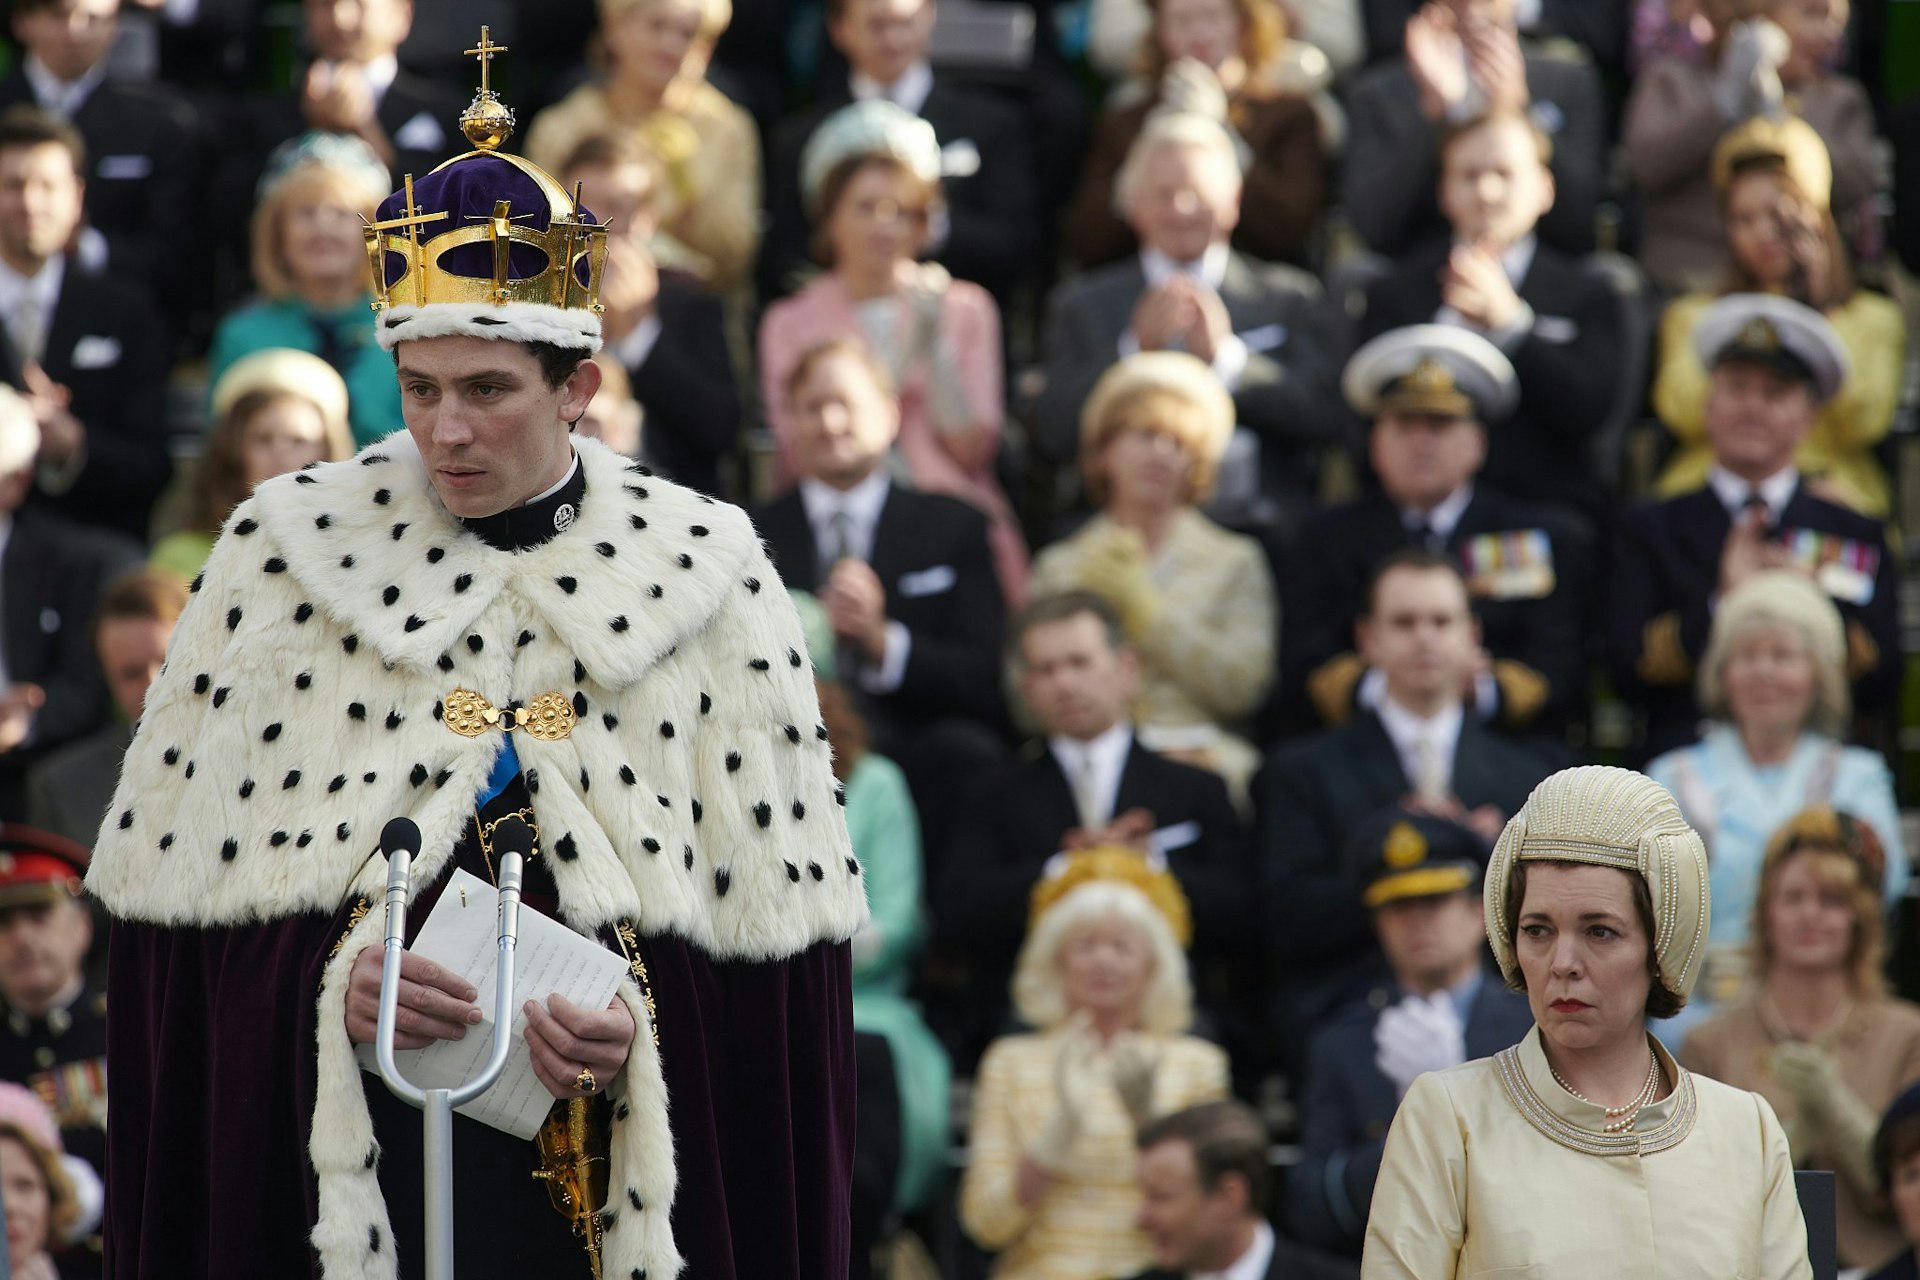 A still from The Crown season 3, depicting Prince Charles’s investiture as the Prince of Wales at Caernarfon Castle; Prince Charles is wearing ceremonial robes while the Queen sits in the background looking unhappy.